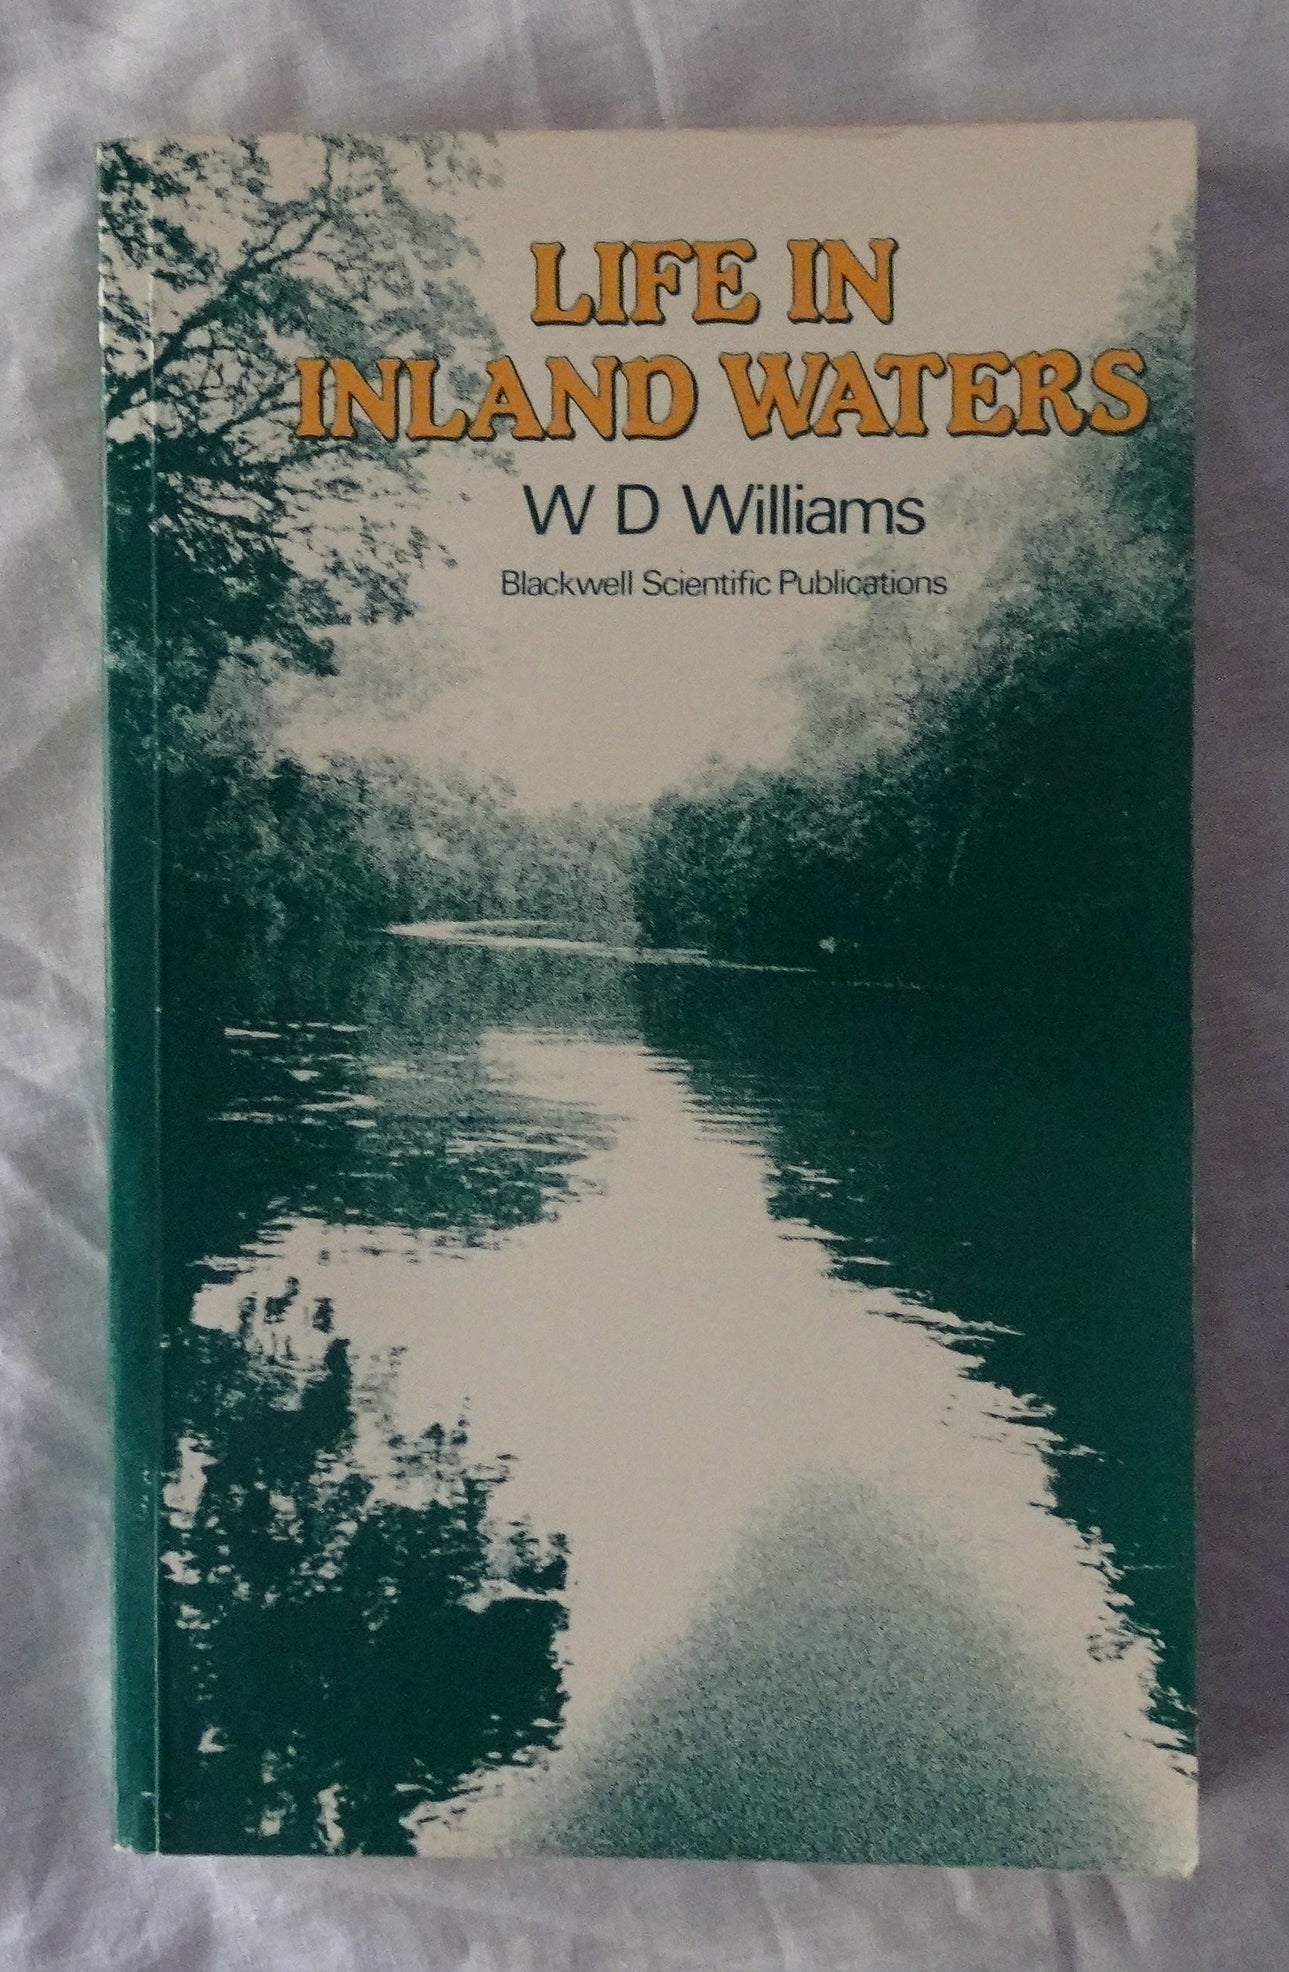 Life In Inland Waters by W. D. Williams